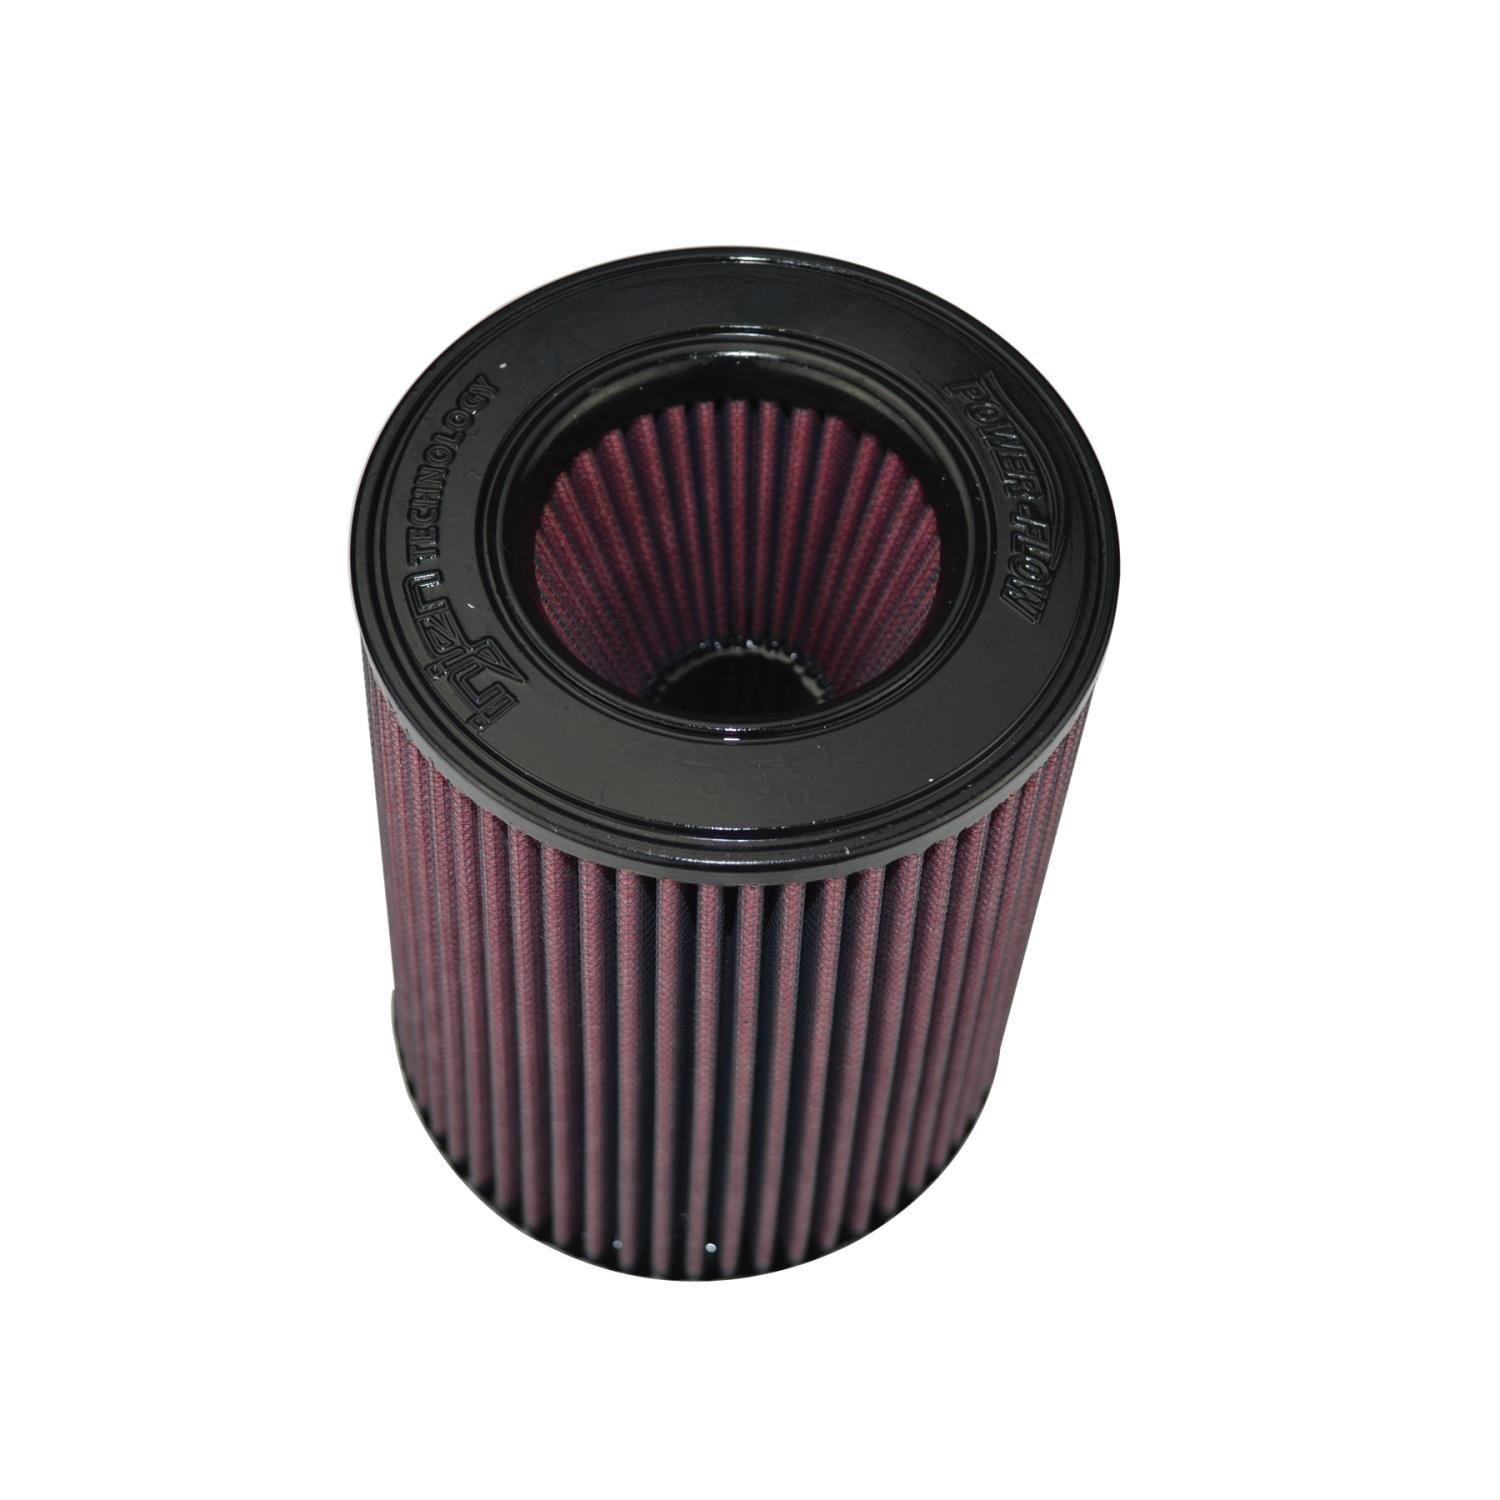 8-Layer Oiled Cotton Gauze Air Filter, 5.00 in. Flange ID, 6.5 in. Base, 8 in. Media Height, 5.30 in. Inertia Top